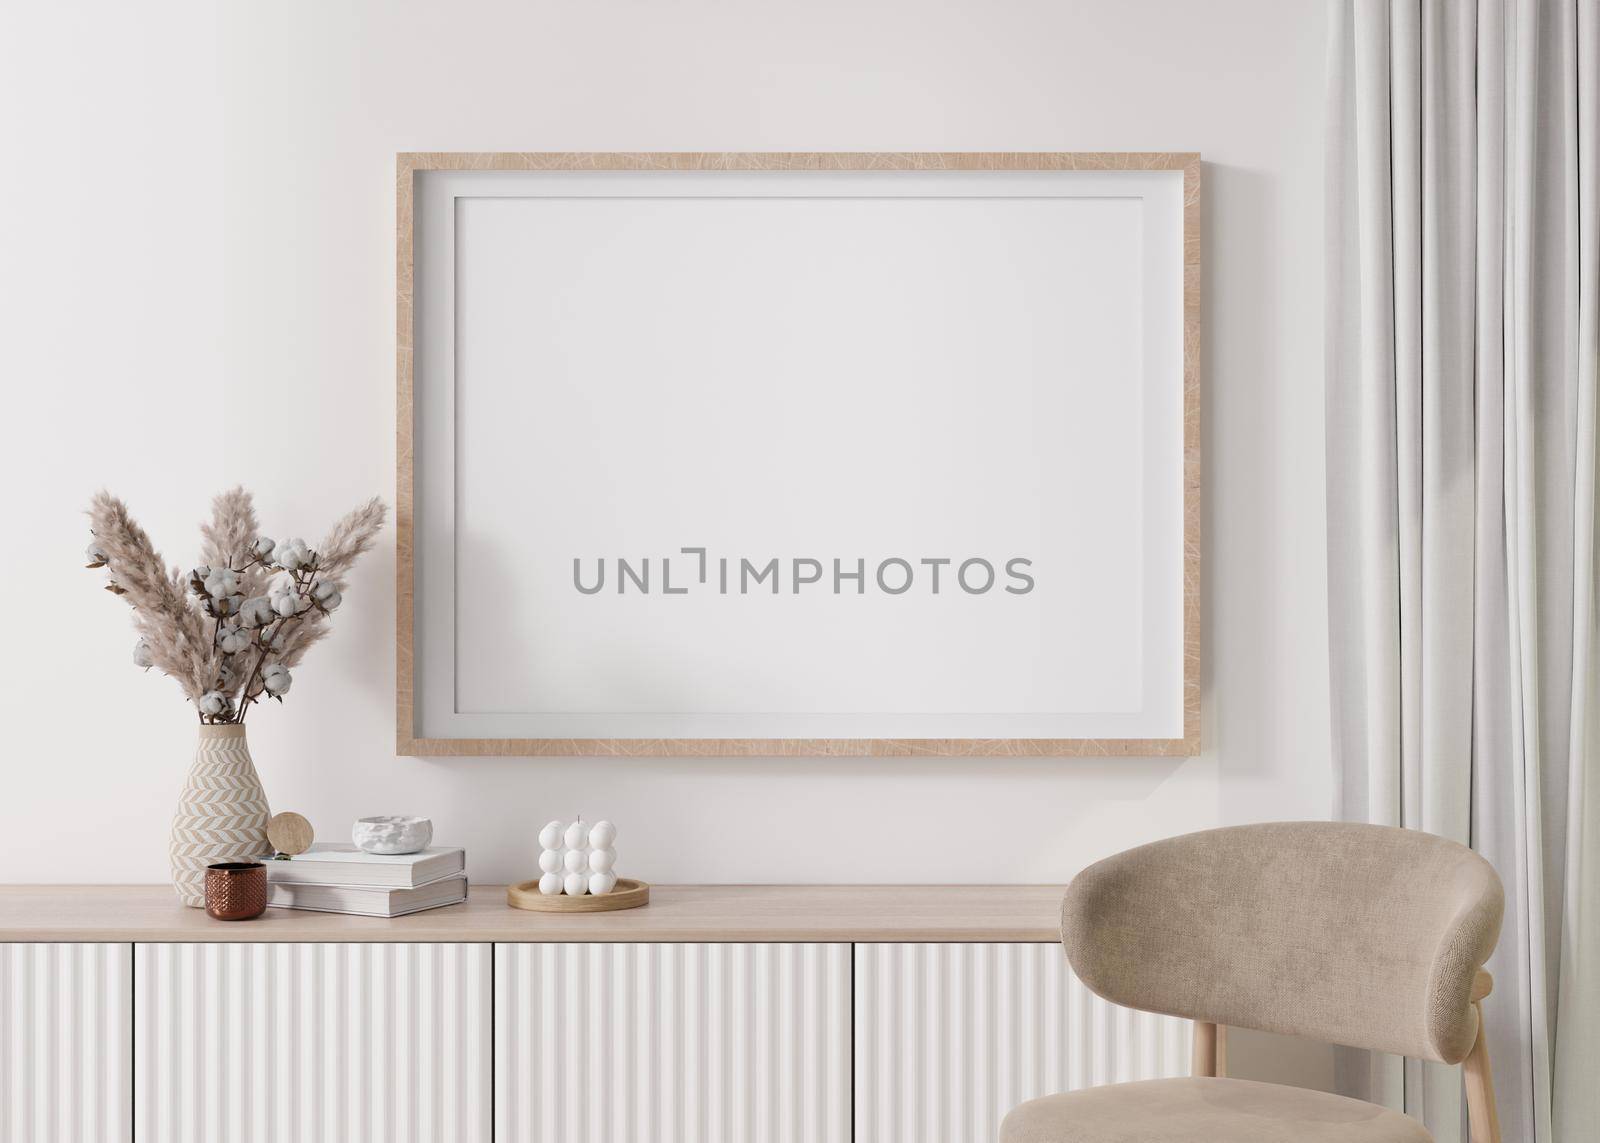 Empty horizontal picture frame on white wall in modern living room. Mock up interior in minimalist, contemporary style. Free space for your picture, poster. Console, pampas grass, vase. 3D rendering